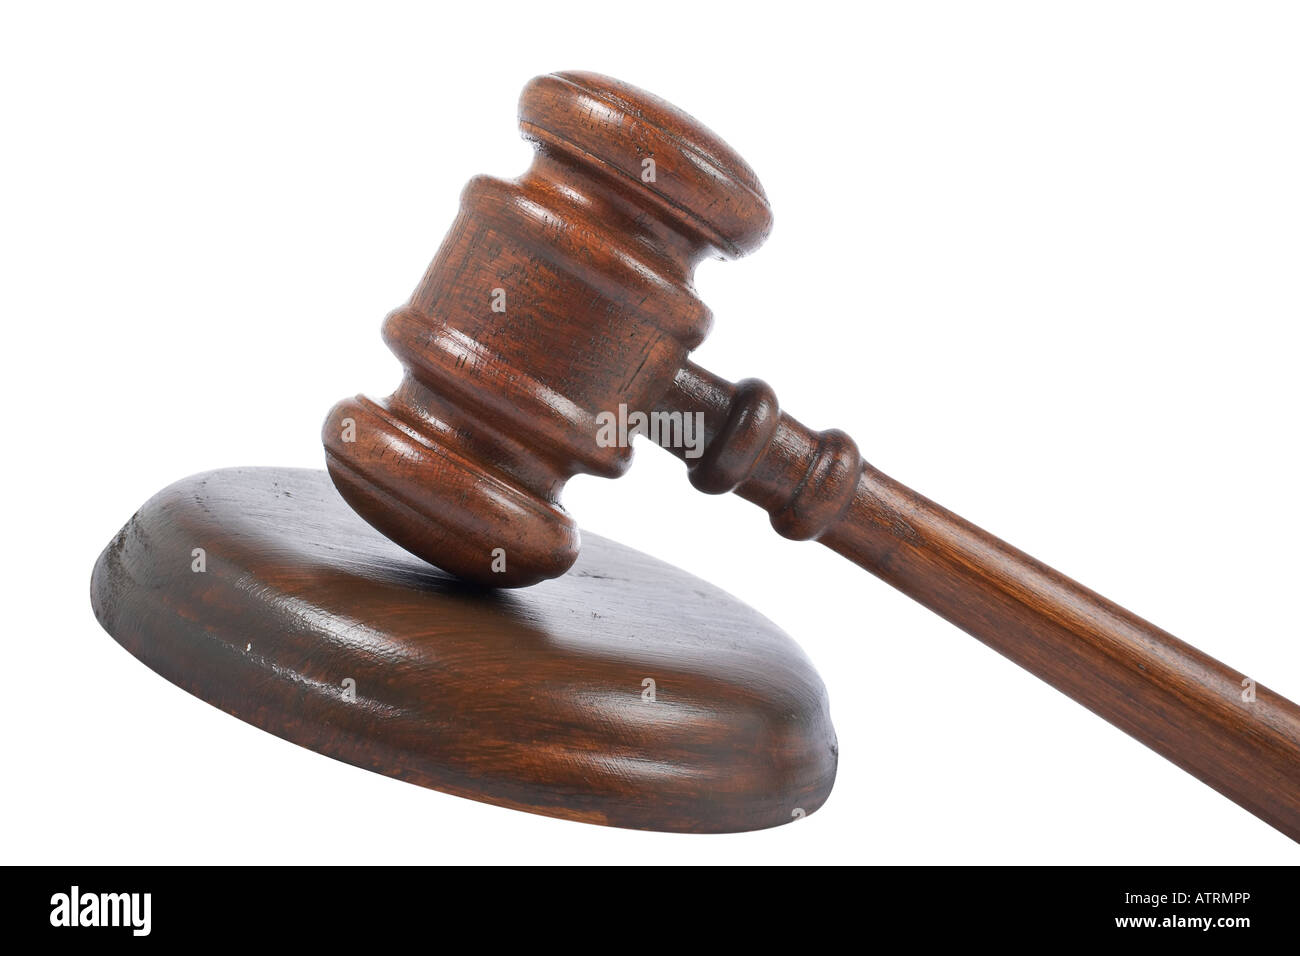 Gavel wooden detail isolated on white background Stock Photo